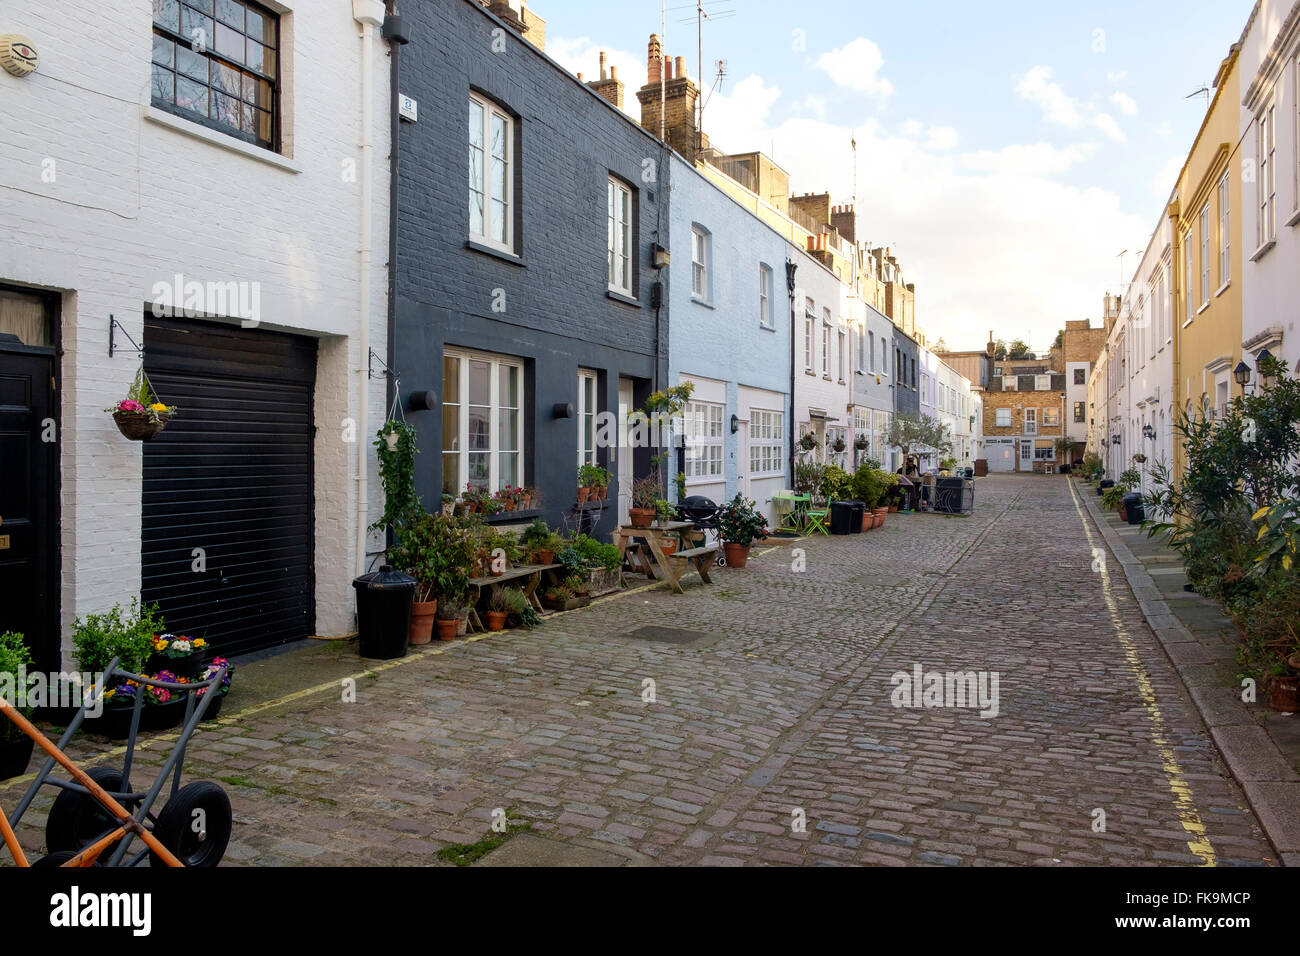 London, UK - 24 February 2016: Mews Houses in Archery Close which is situated behind Connaught Square. Stock Photo